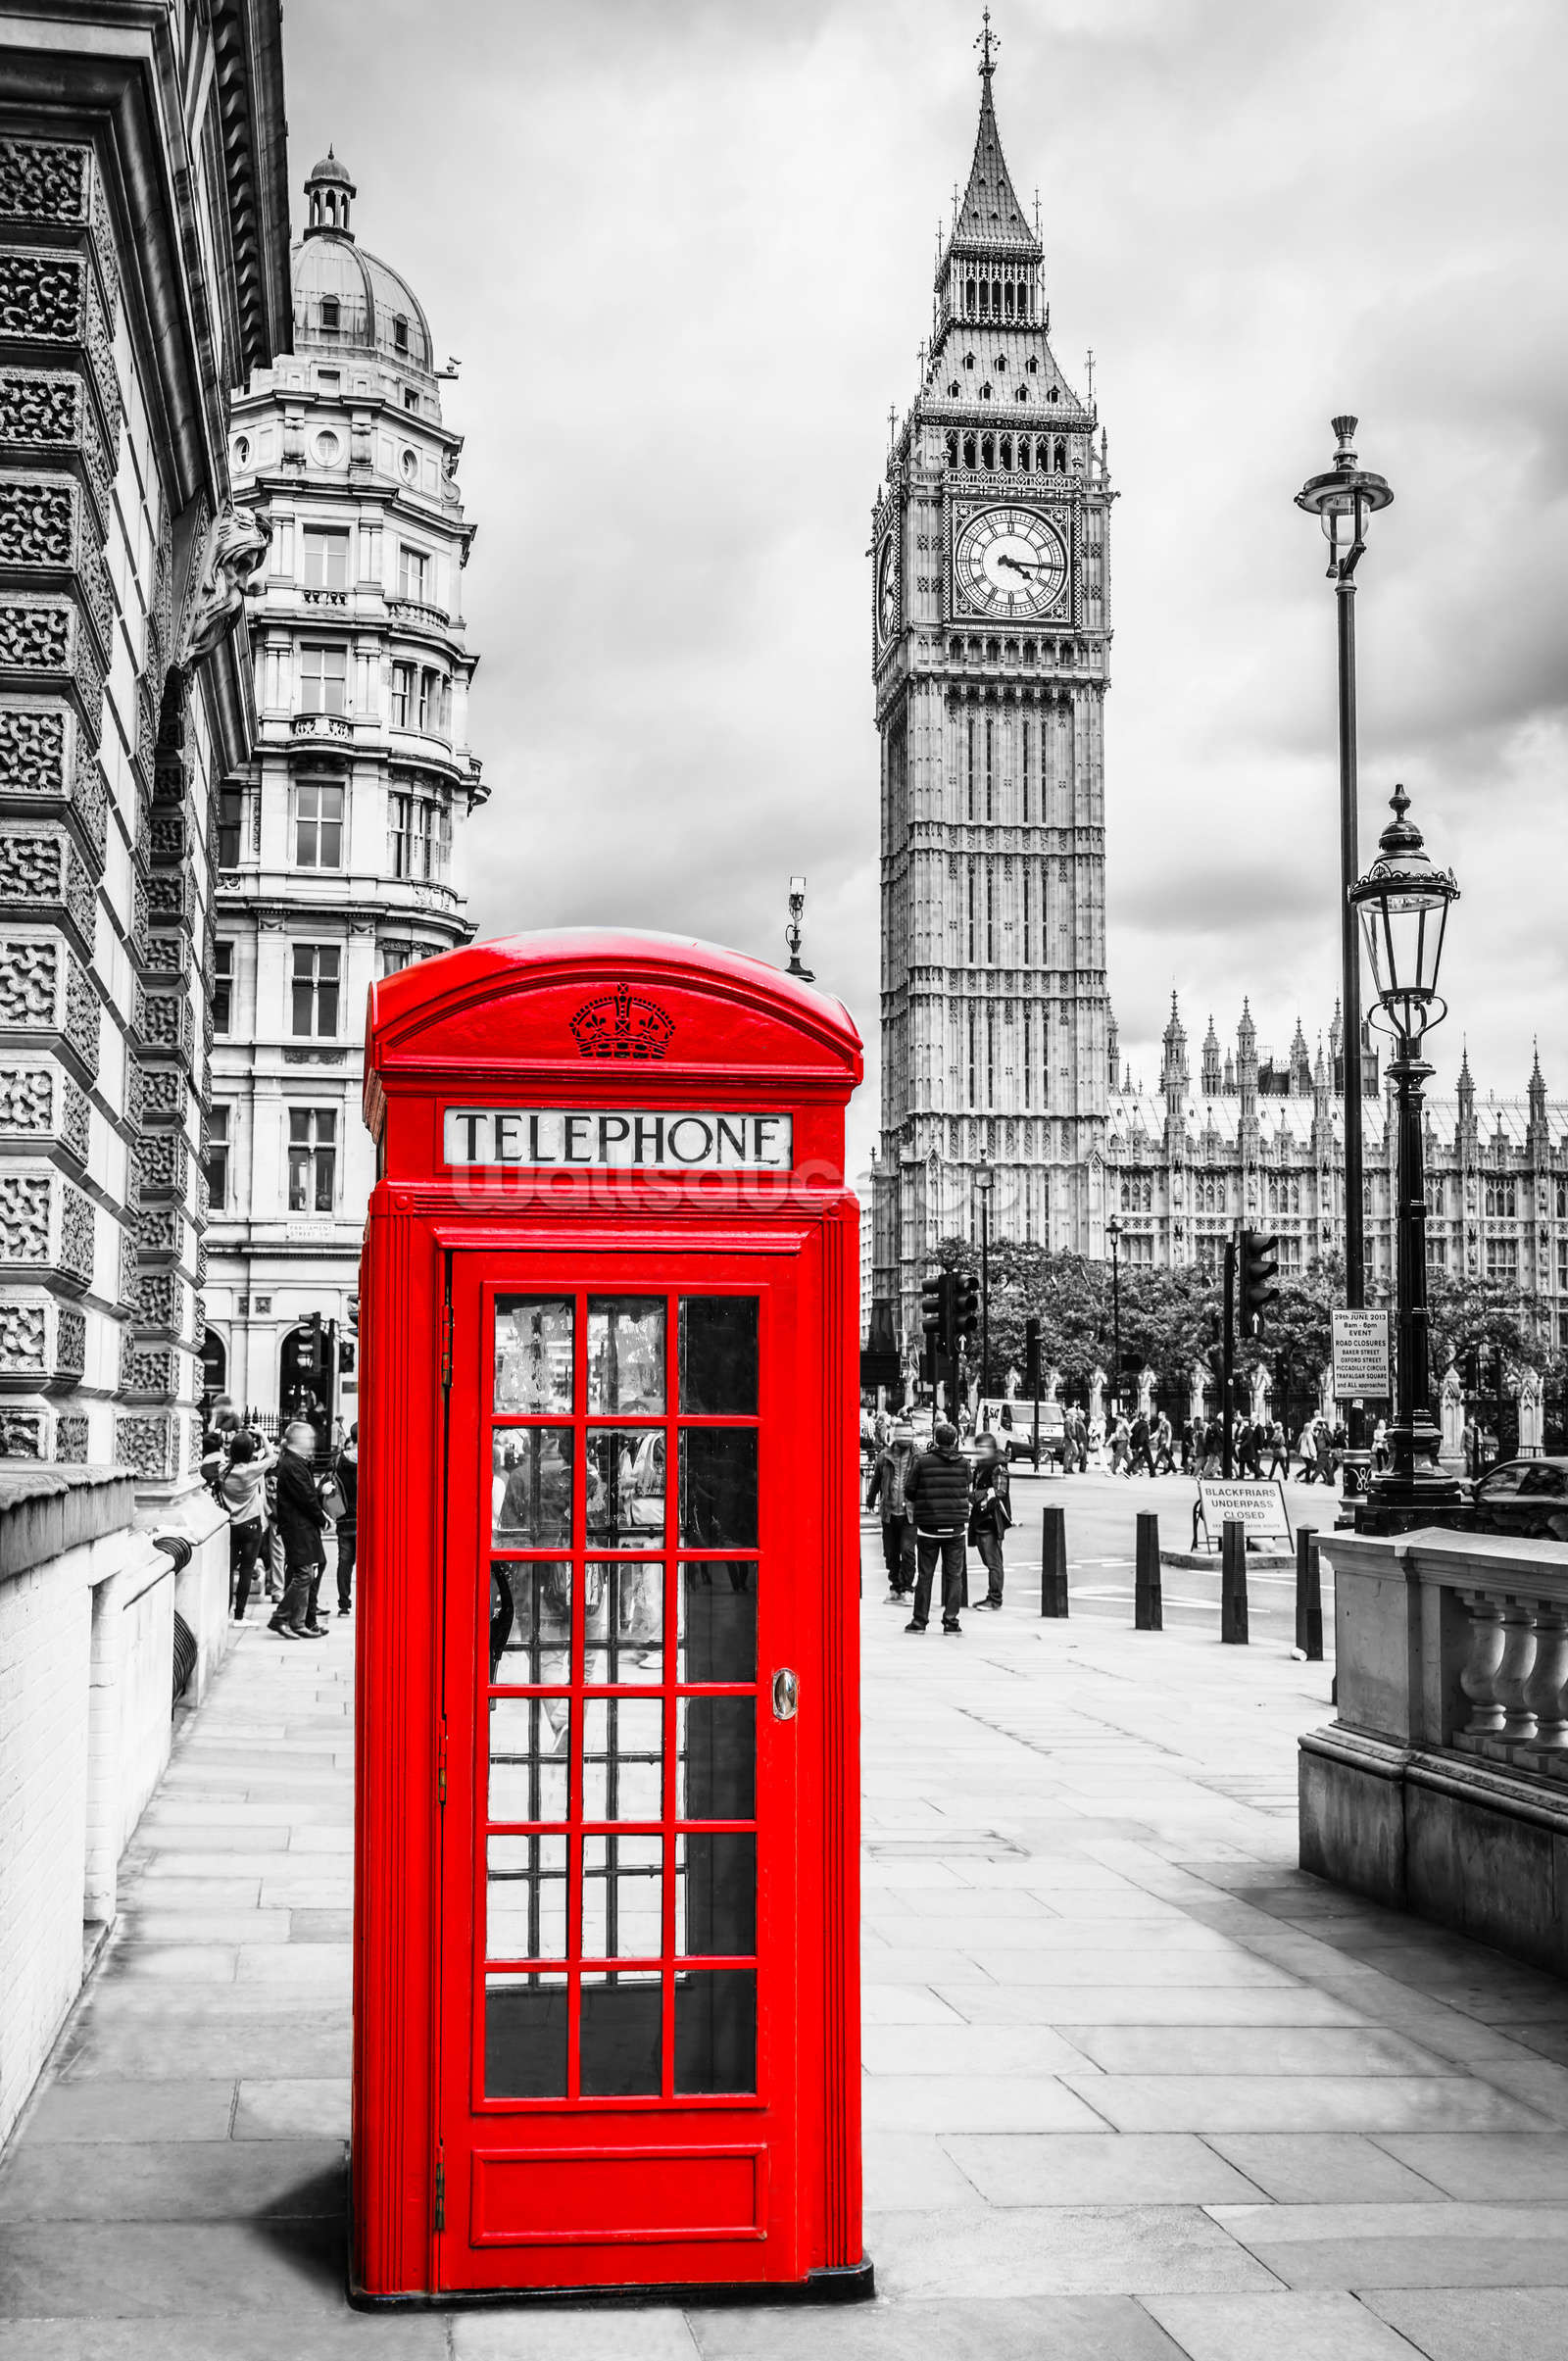 london wallpaper black and white,telephone booth,red,payphone,landmark,telephony